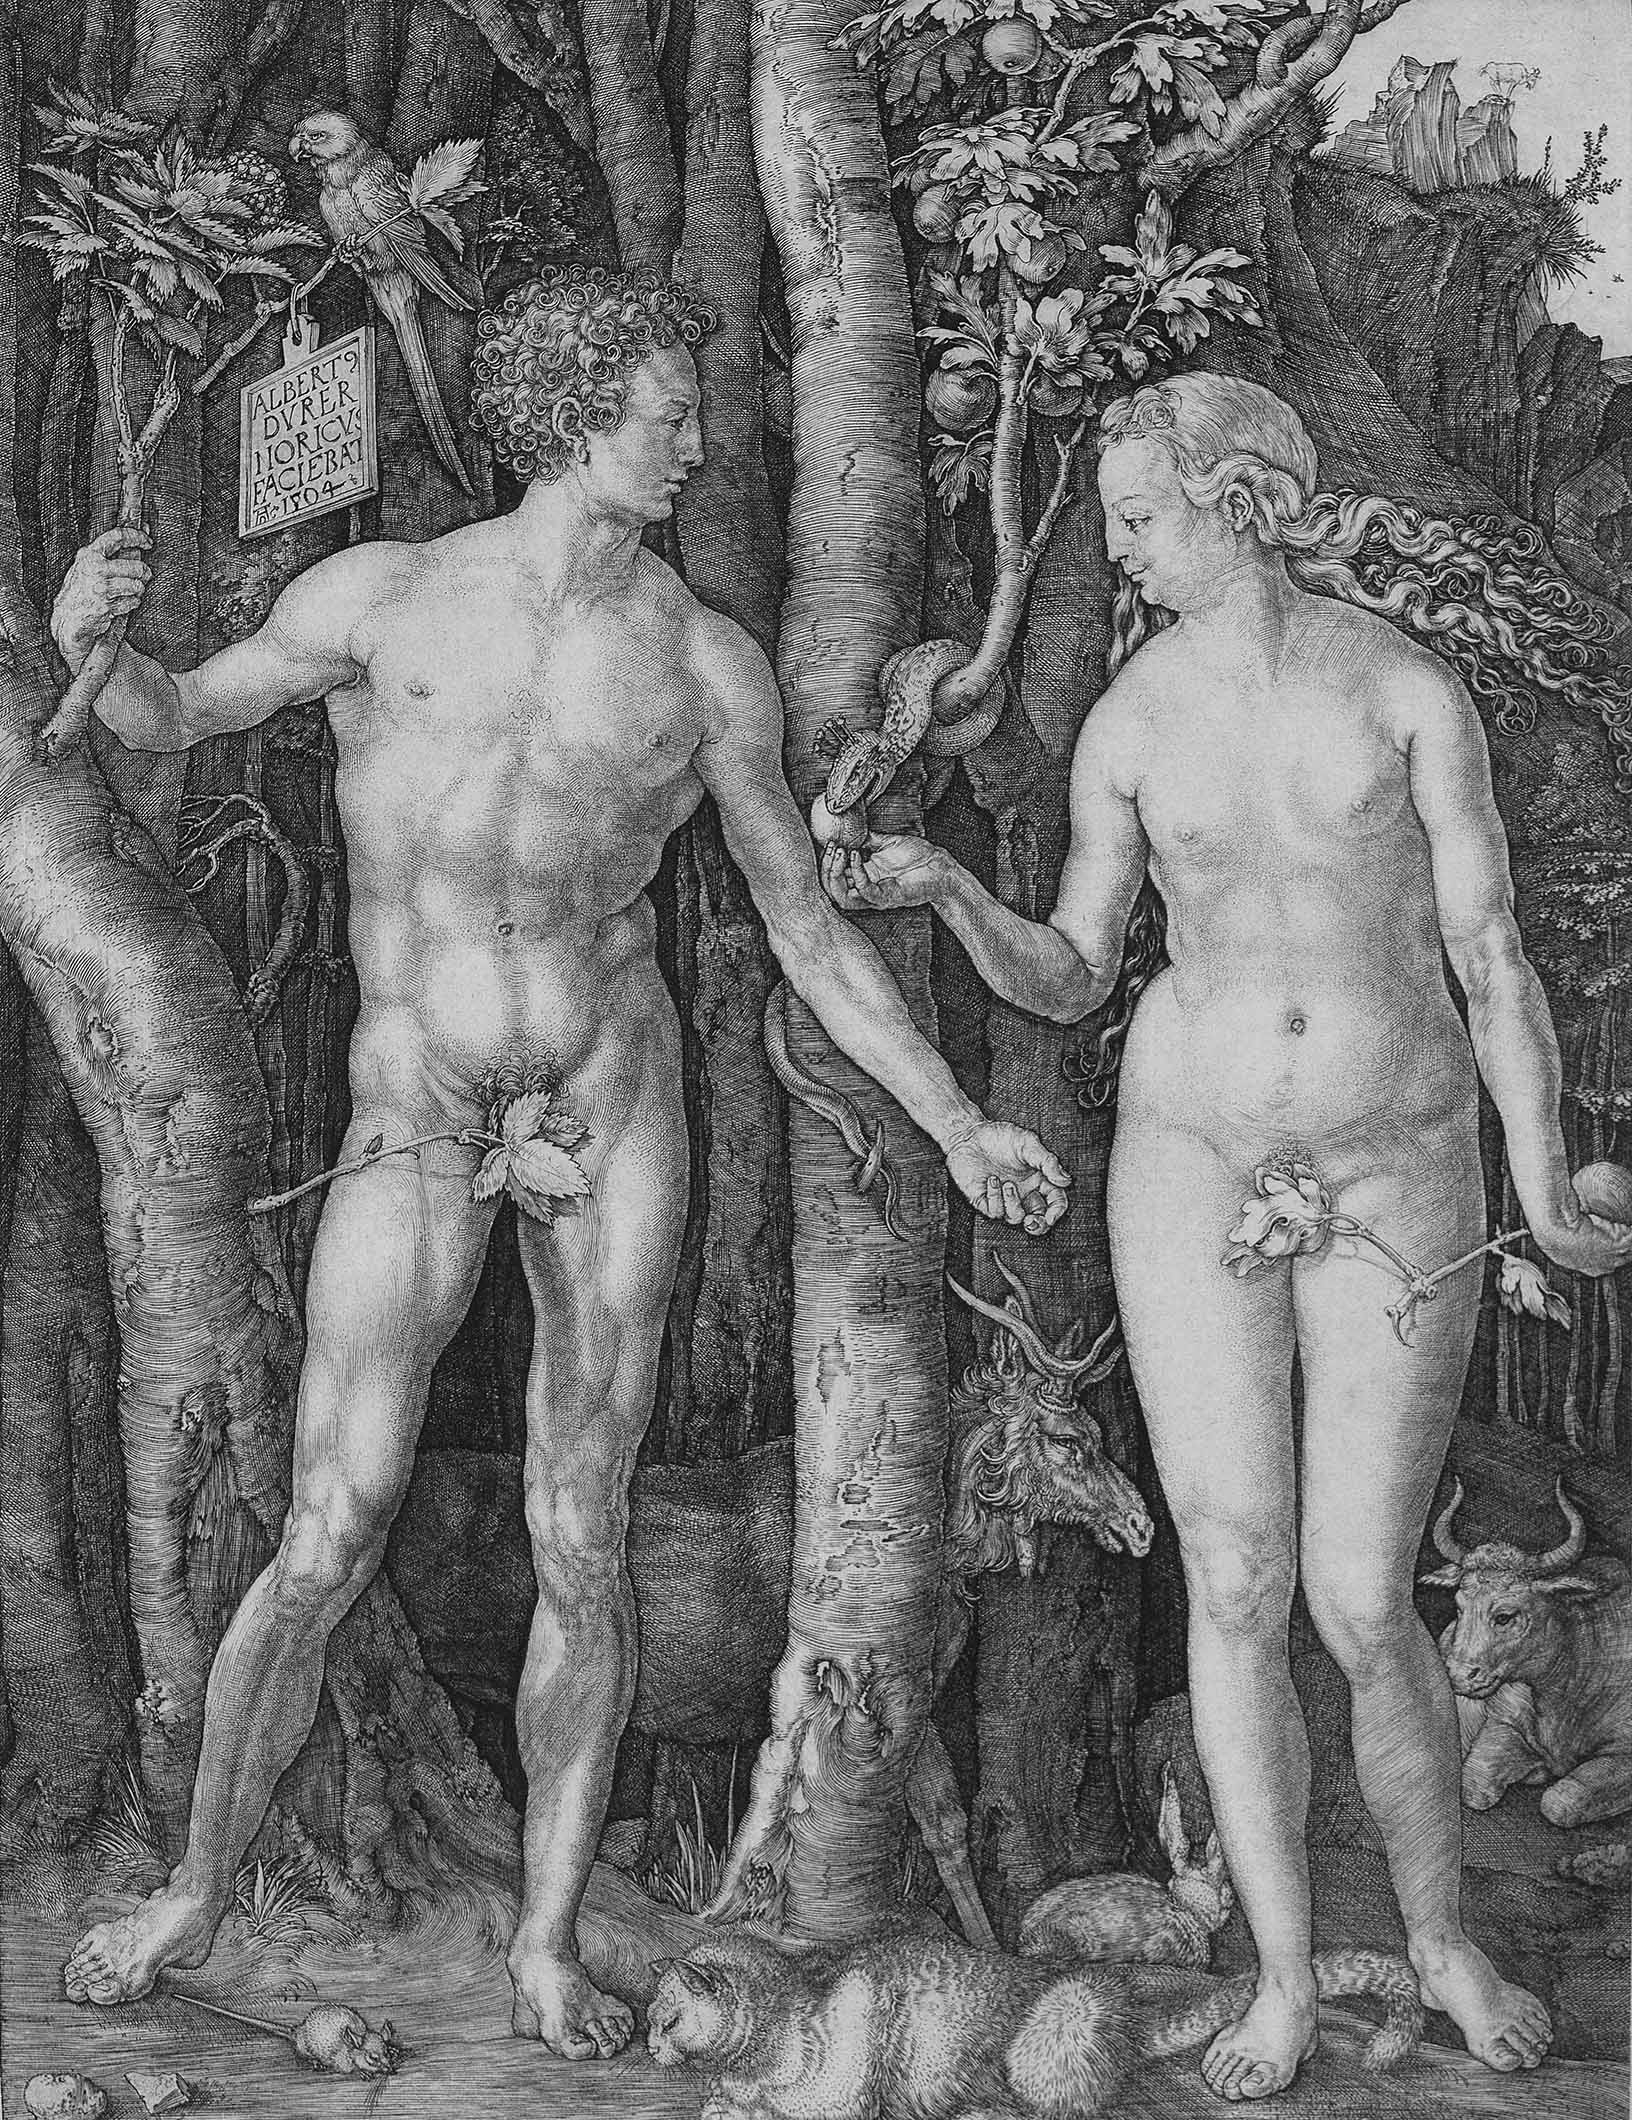 Albrecht Dürer (Nuremberg 1471–1528), Adam and Eve, copper engraving, monogrammed and dated in the plate AD 1504, 24.9 x 19 cm, realised price € 41,780.00, sold on 4 Nov. 2010